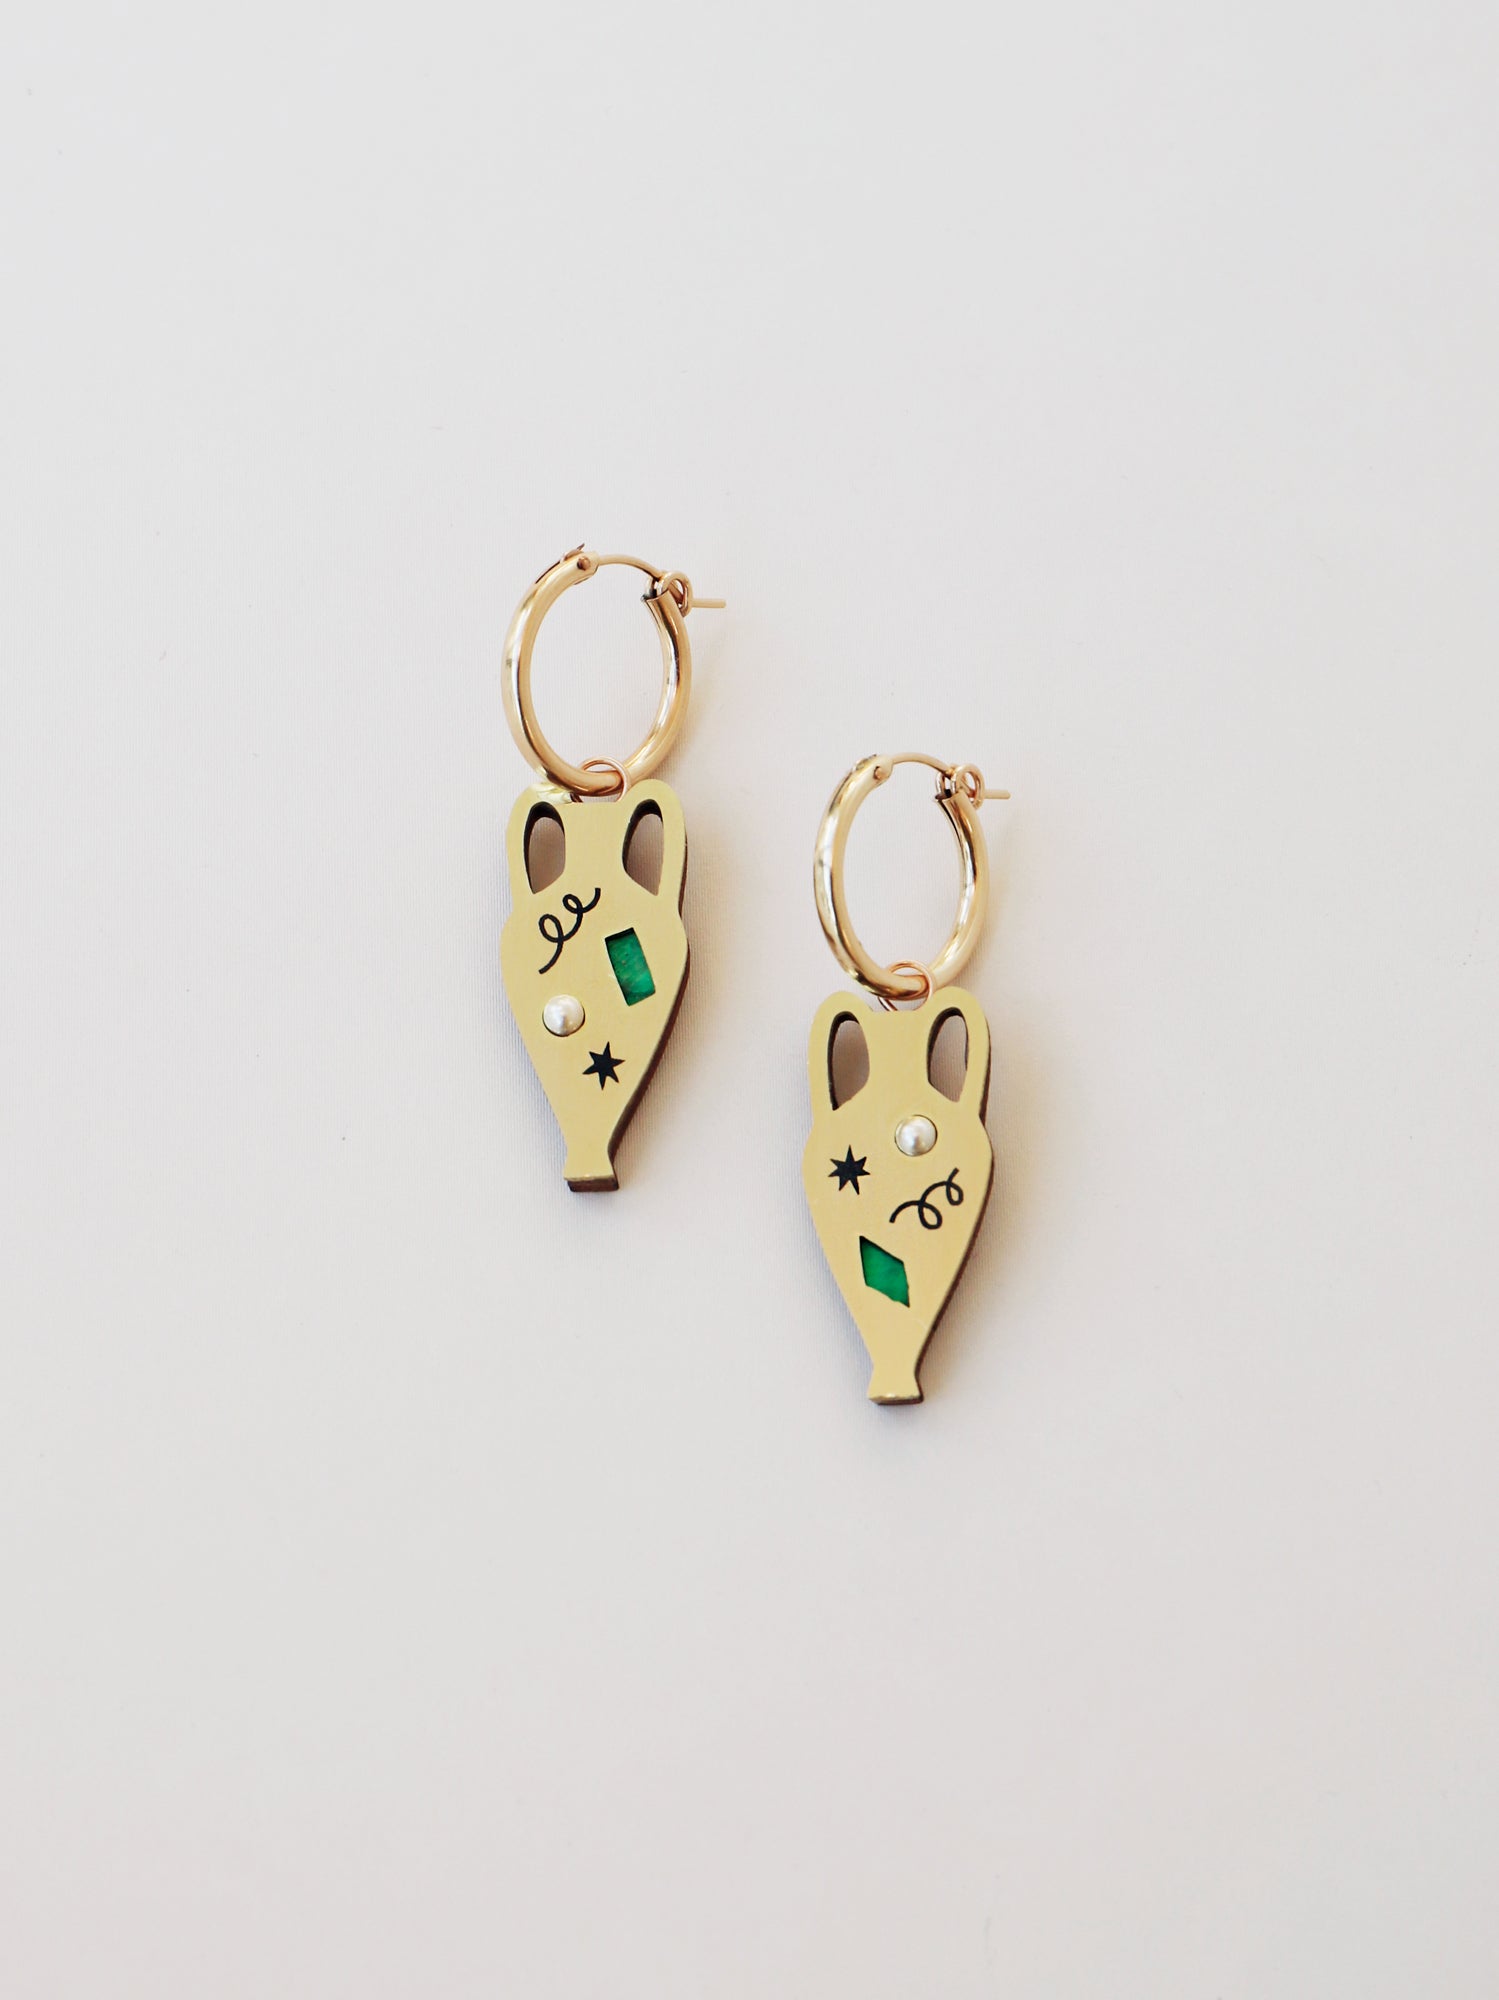 Brass vase shape hoop earrings. Glass pearls and abstract cut outs with inlaid shell and illustrative detailing.